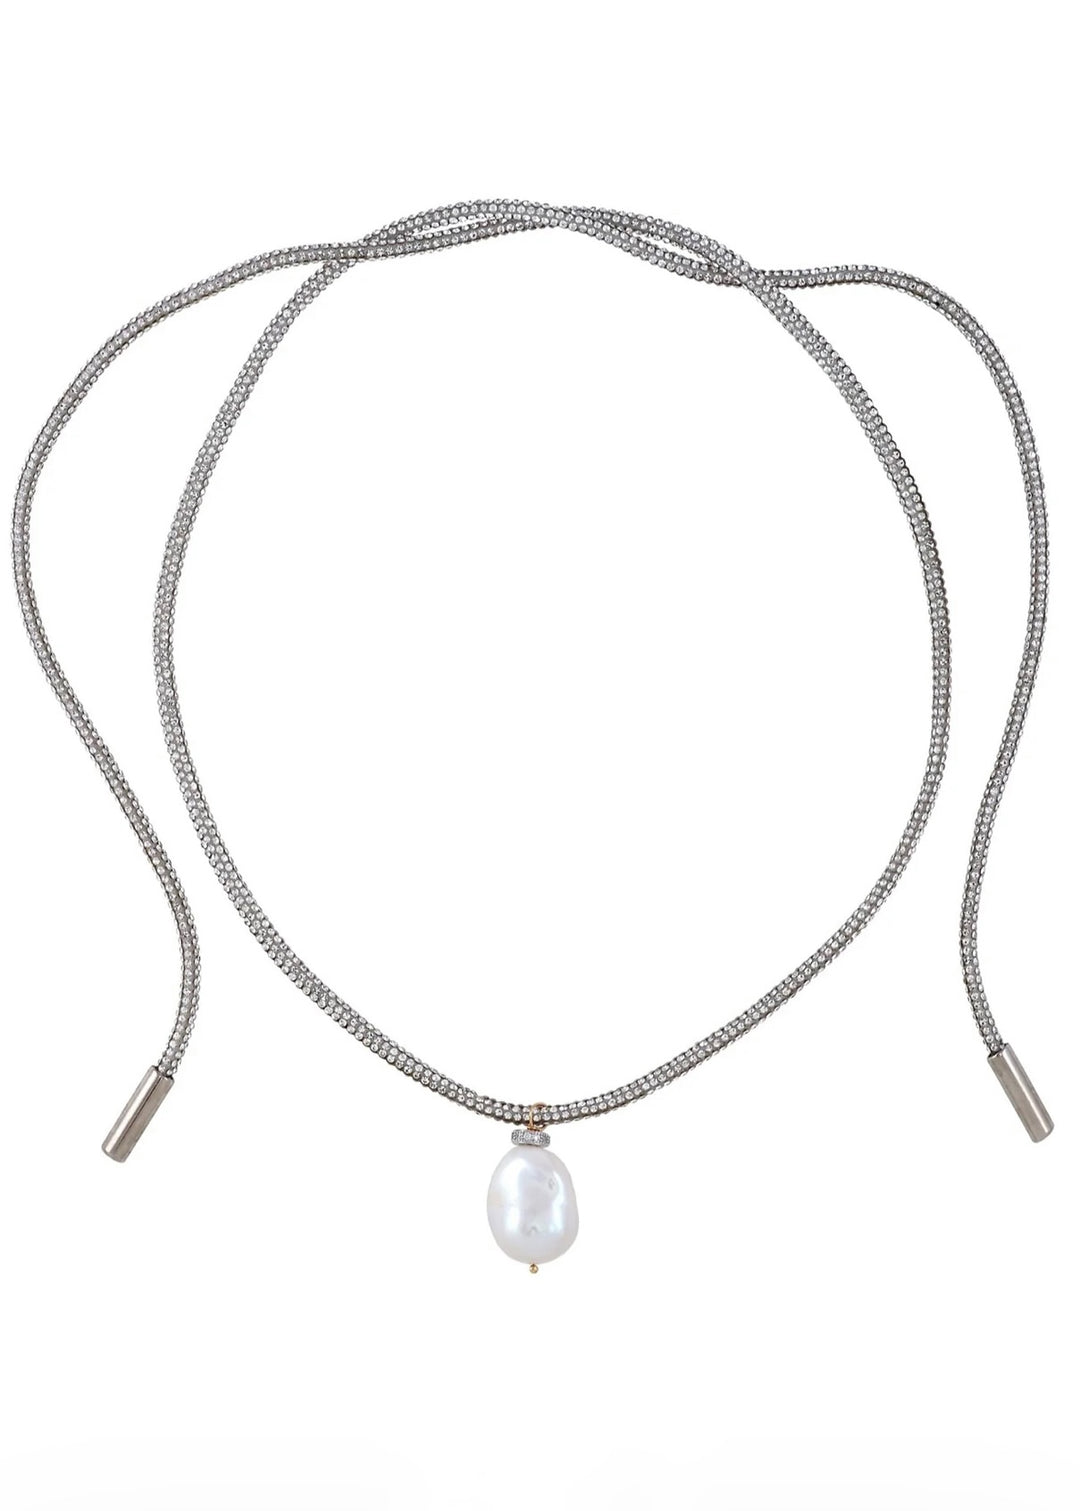 CRYSTAL CORD NECKLACE